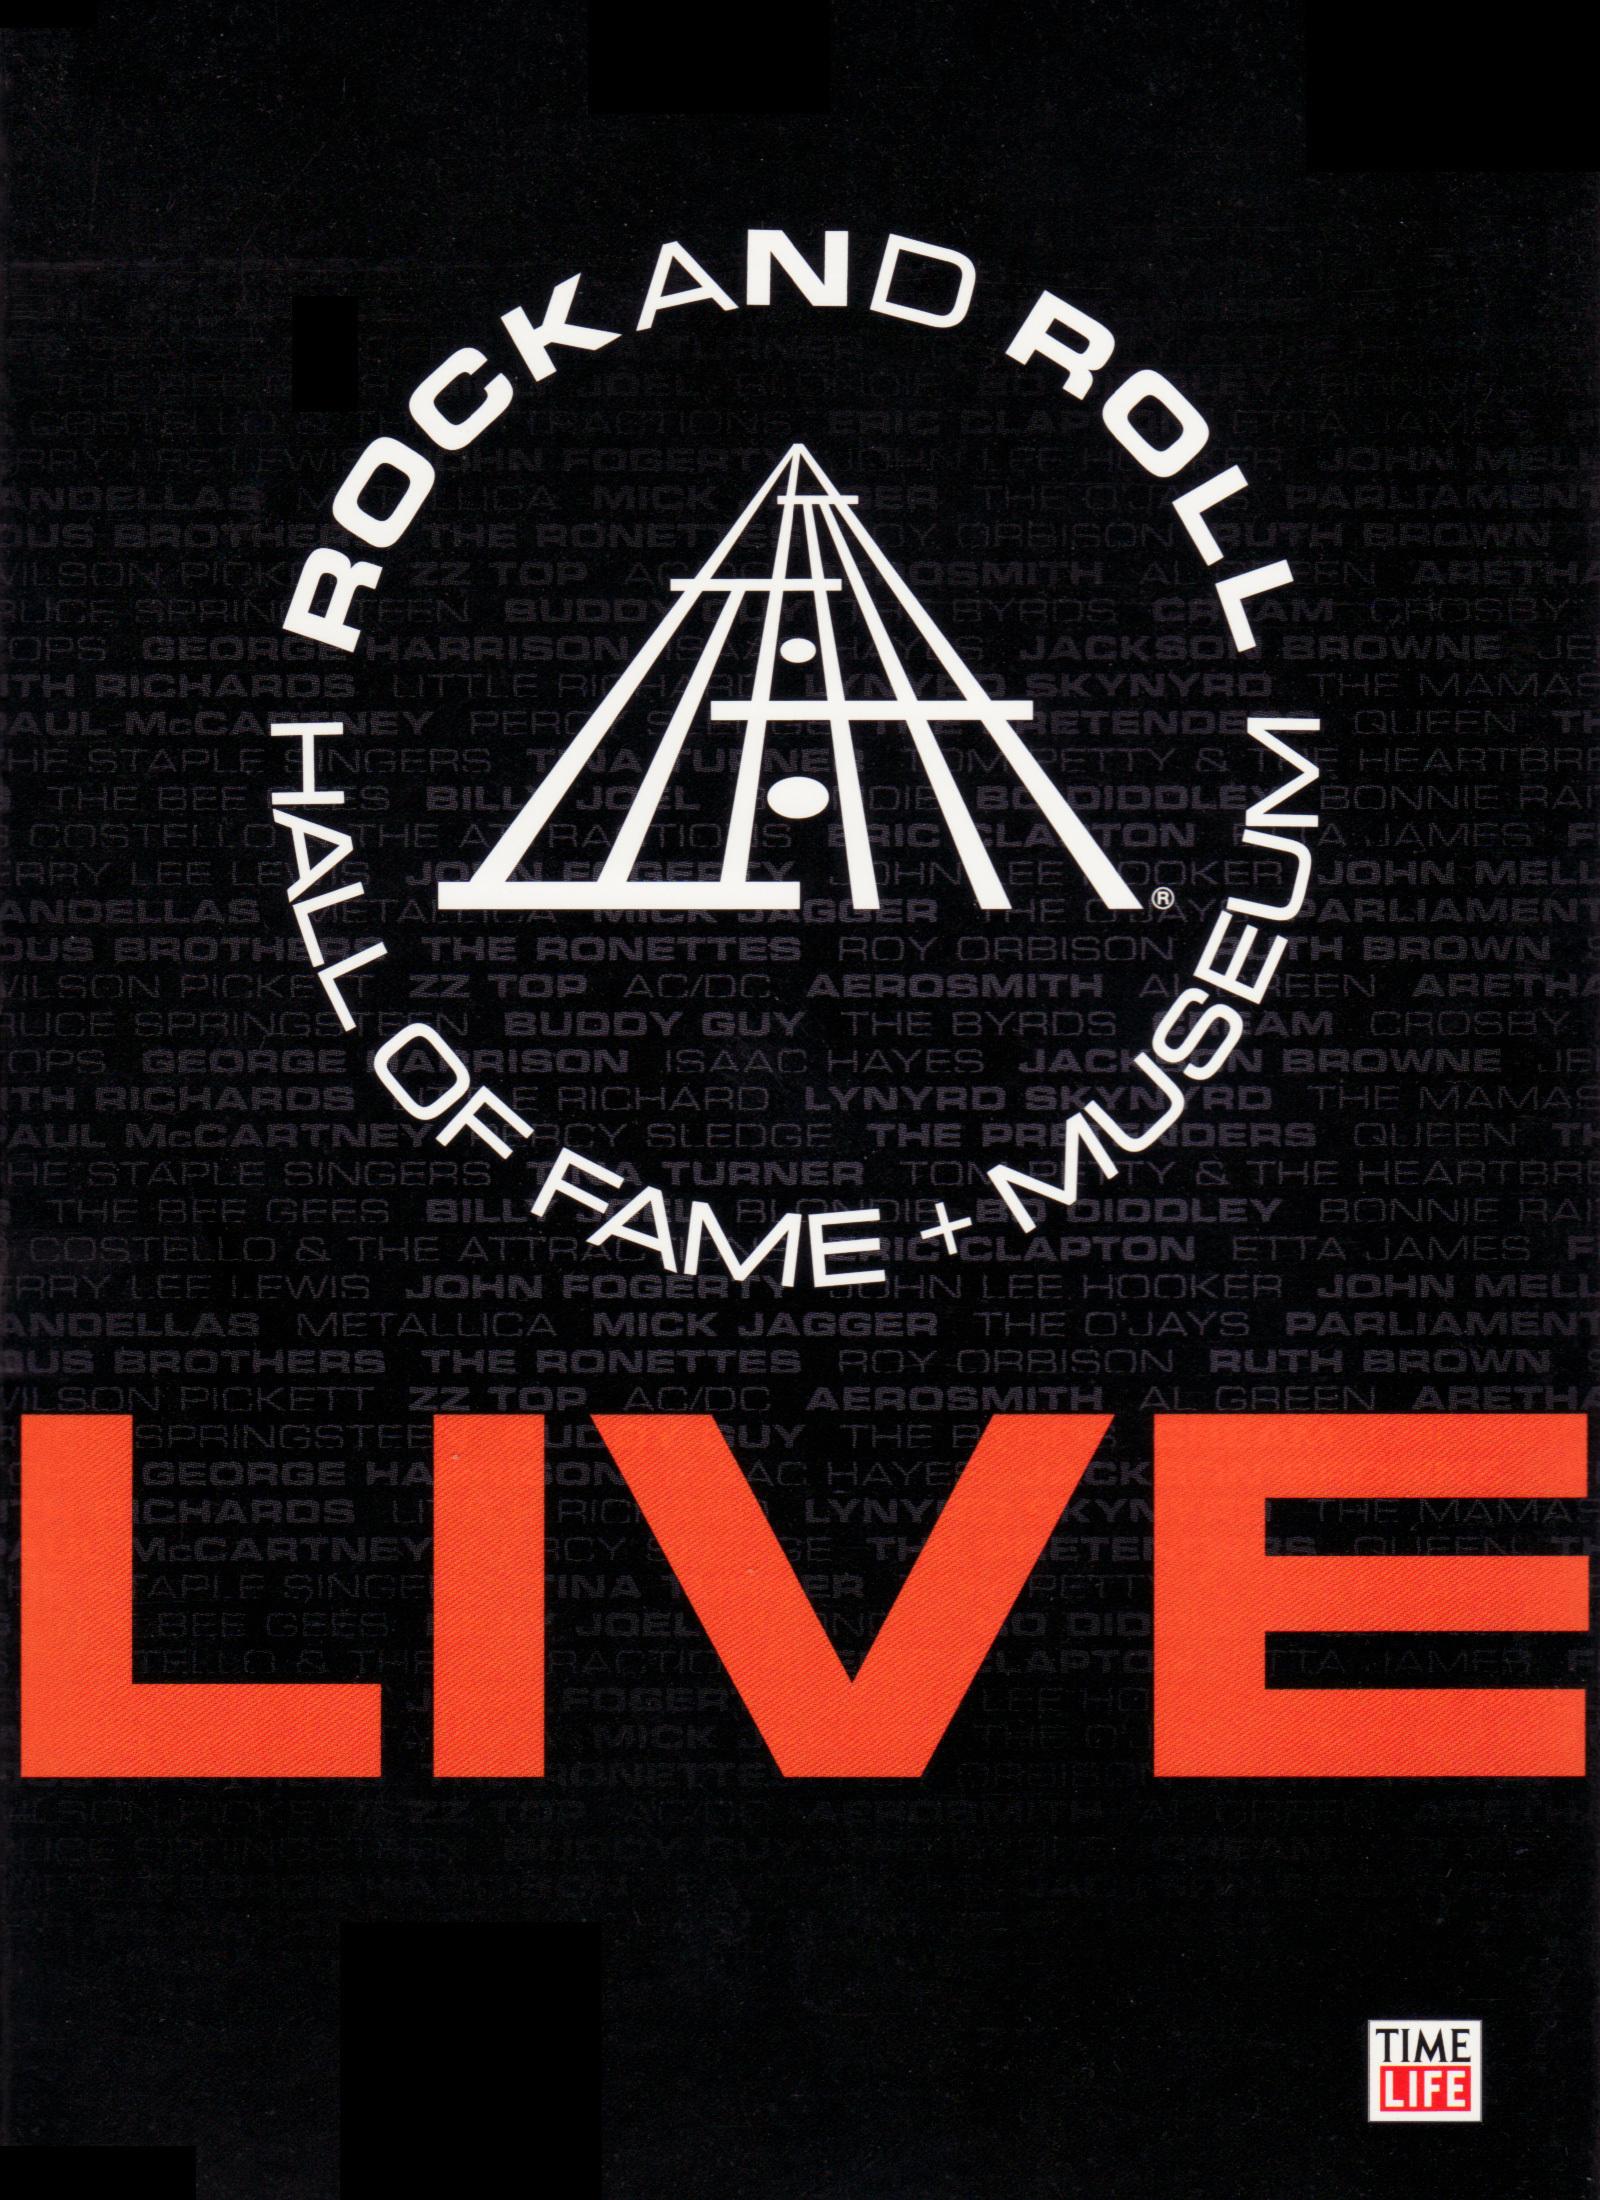 Rock and Roll Hall of Fame Live